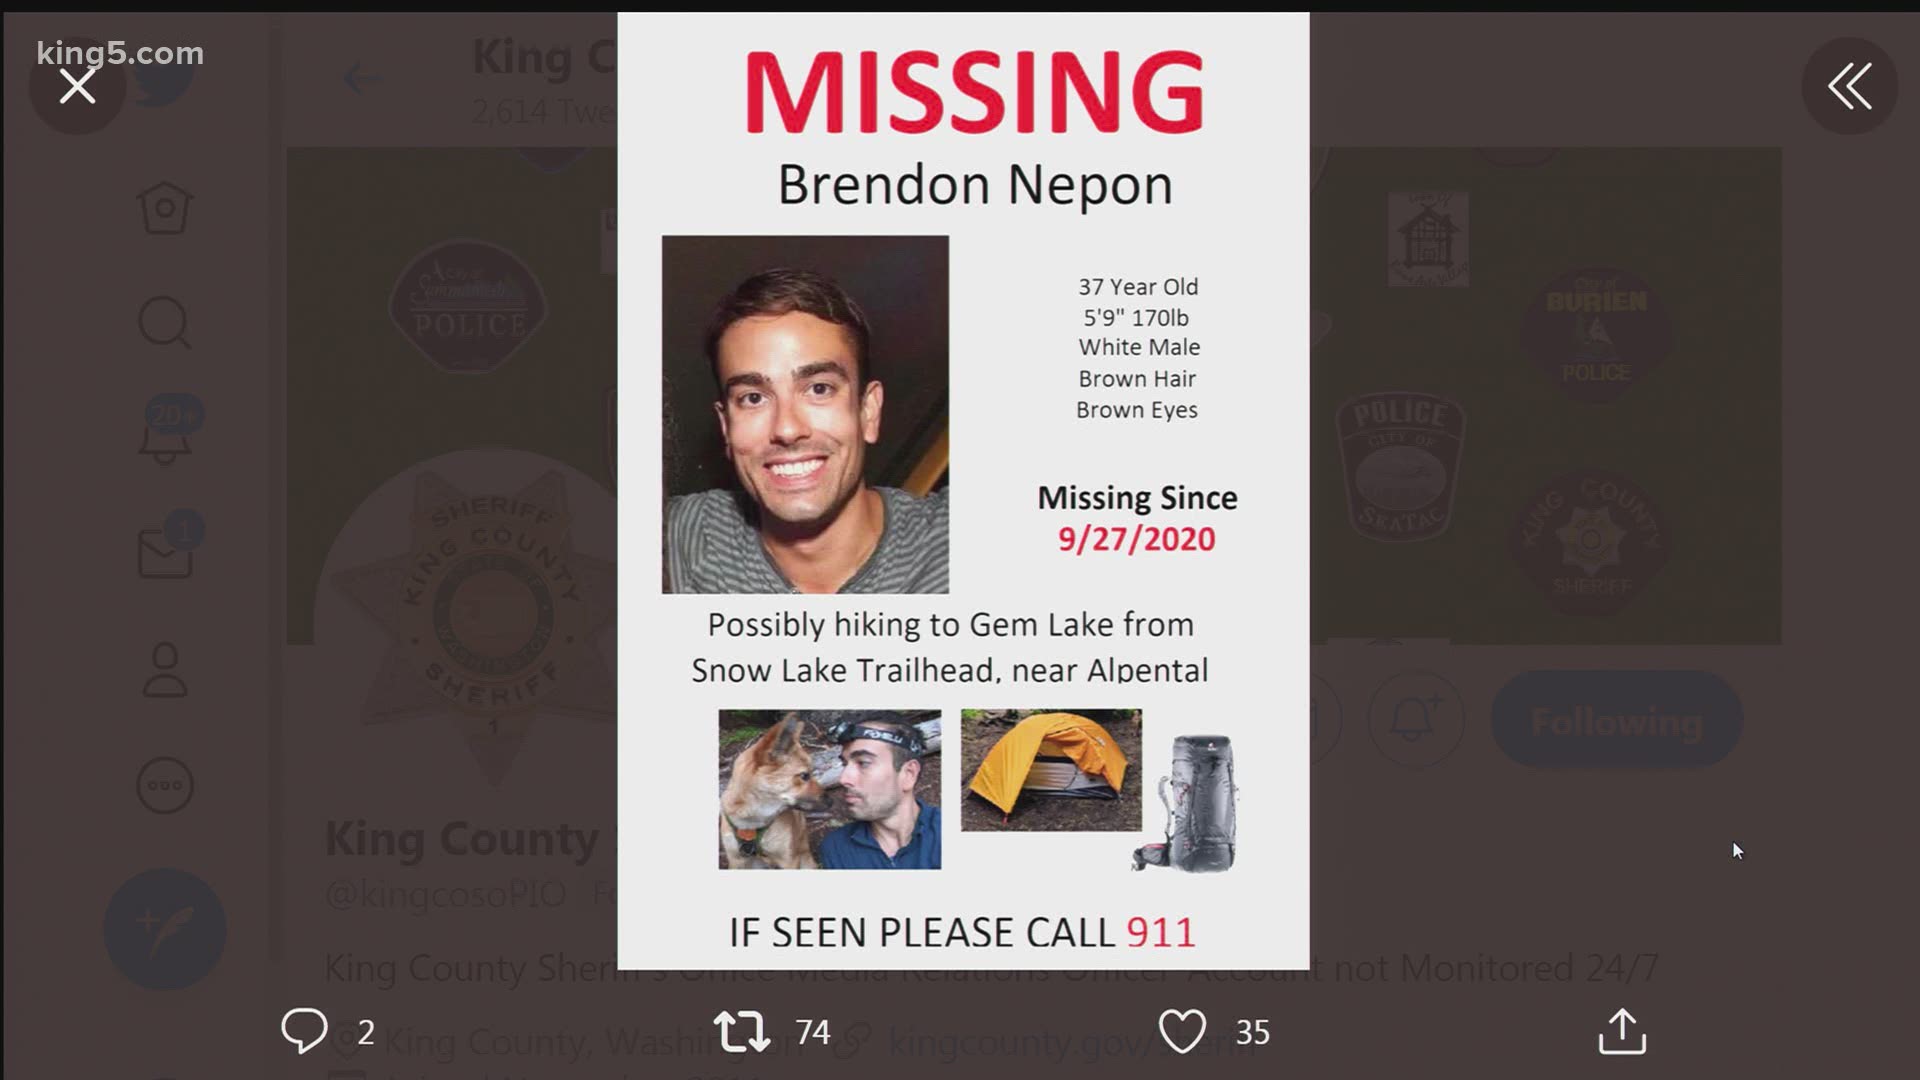 Rescue crews will be looking for Brendon Nepon, a hiker missing near Alpental, and his dog. He was possibly headed for Gem Lake.